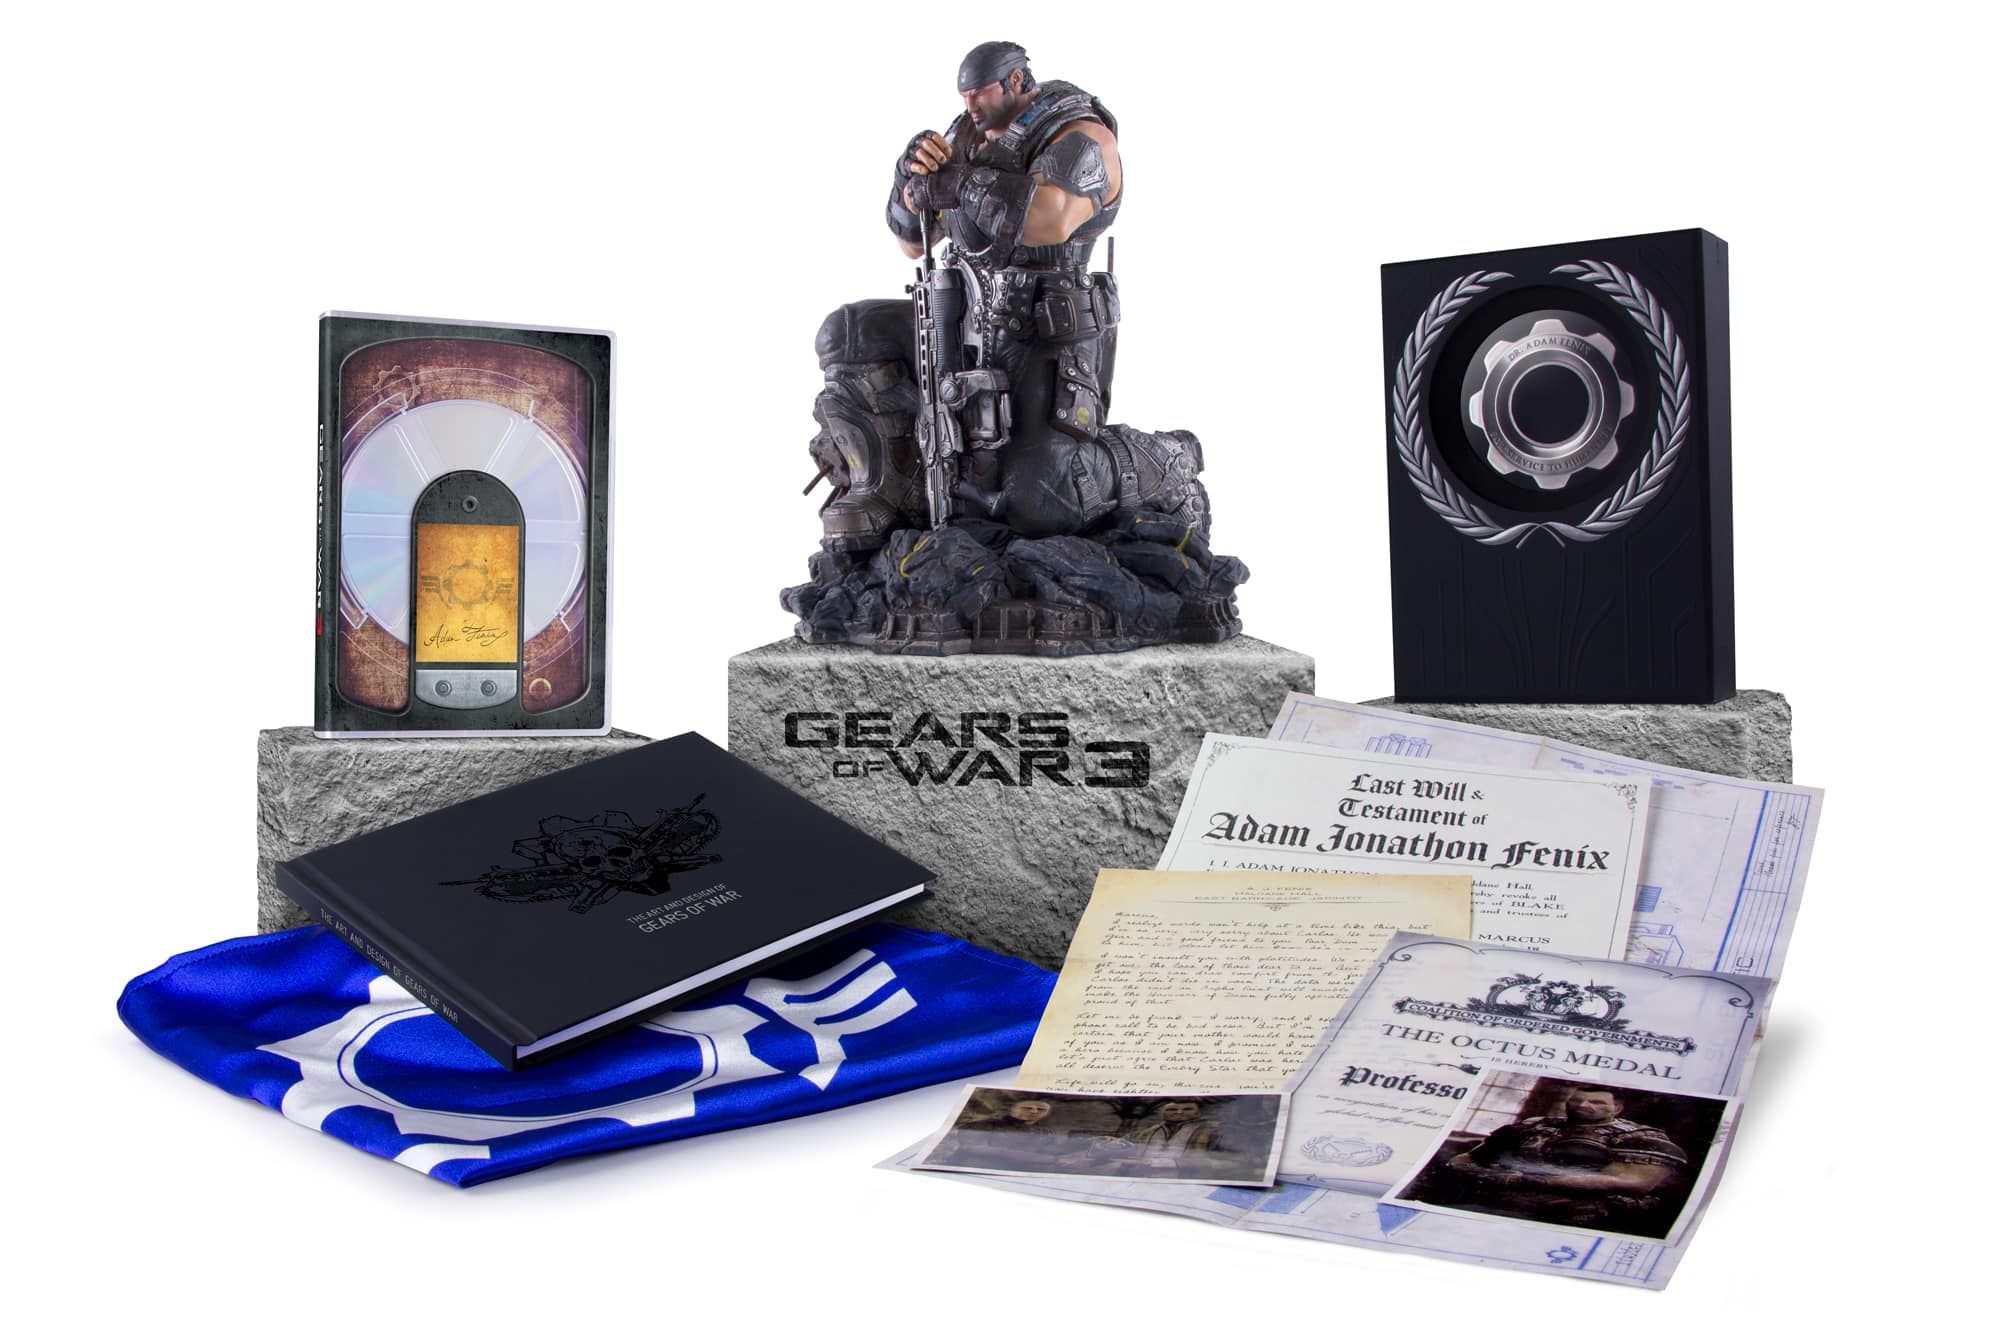 Gears of War 3. will be getting two special editions